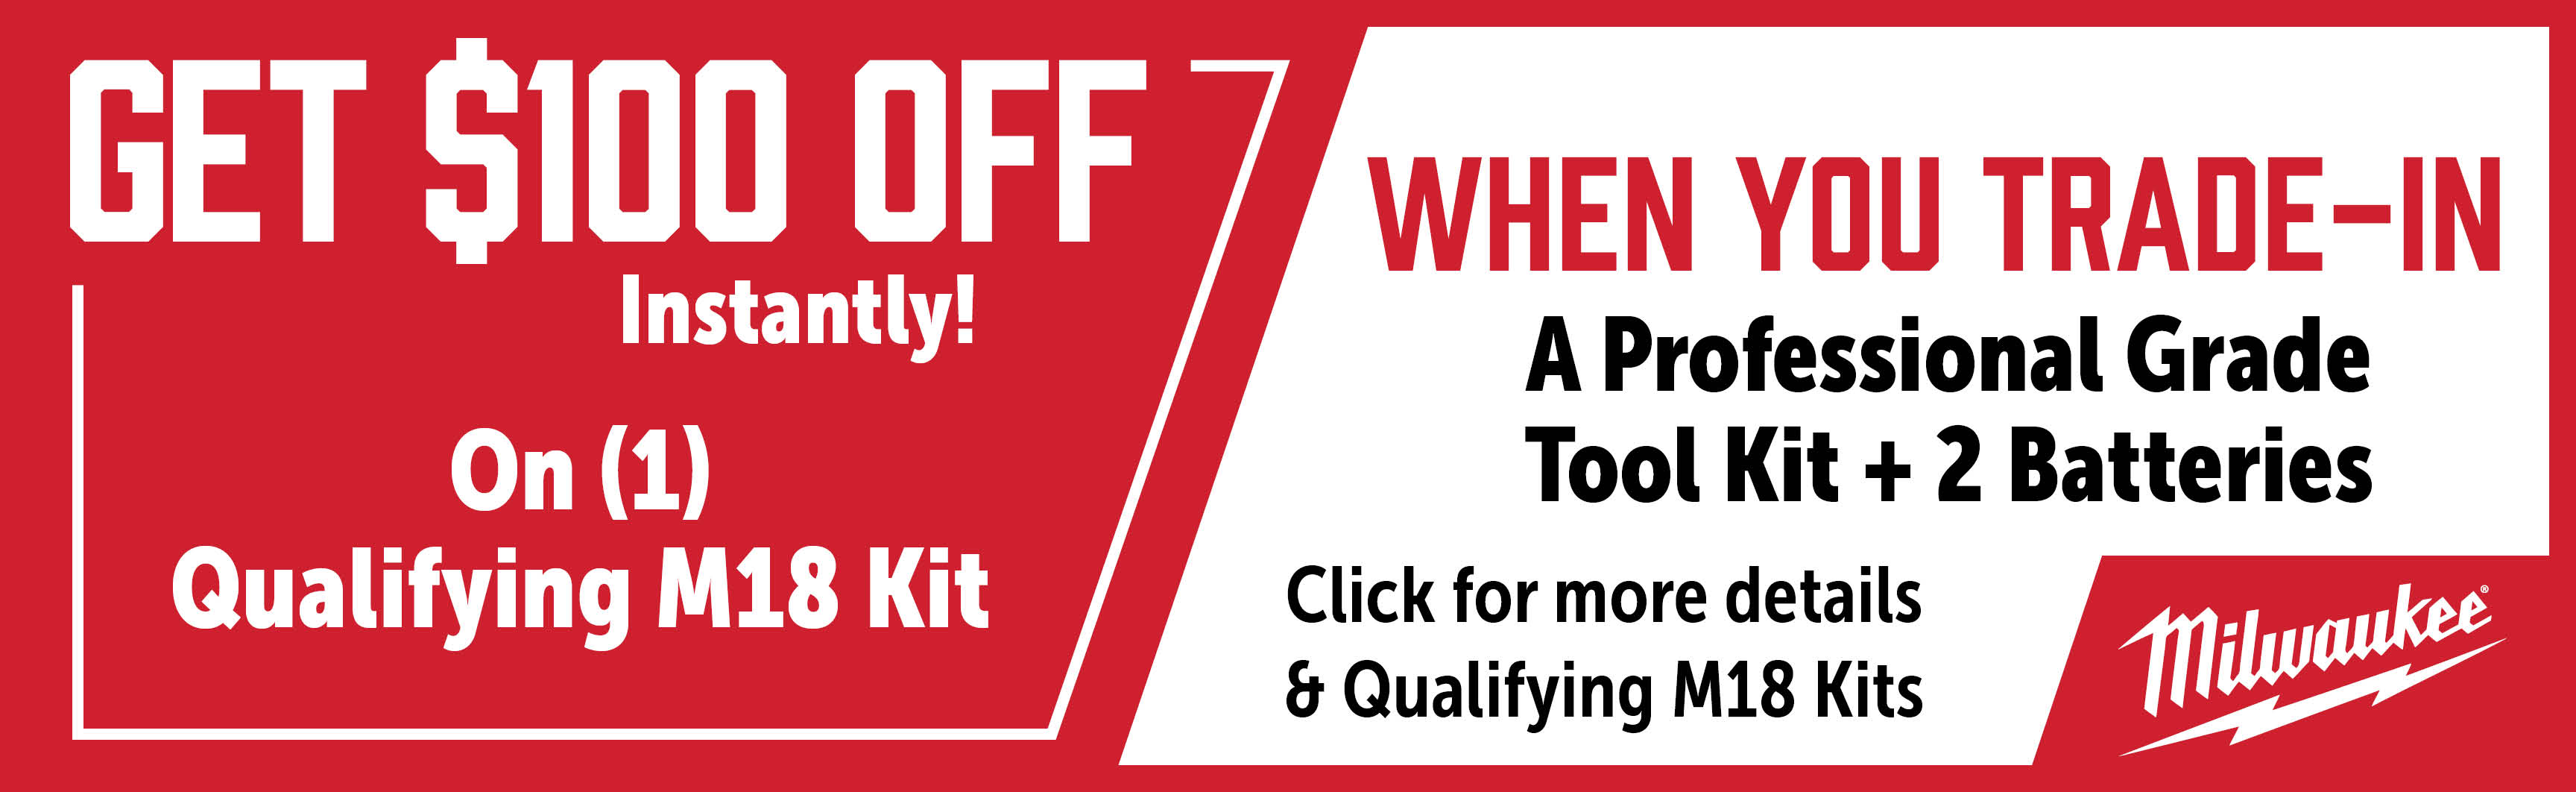 Milwaukee Aug-Oct: Buy a Qualifying M18 Kit and Get $100 Off when you Trade-In a Pro Grade Tool Kit & 2 Batteries